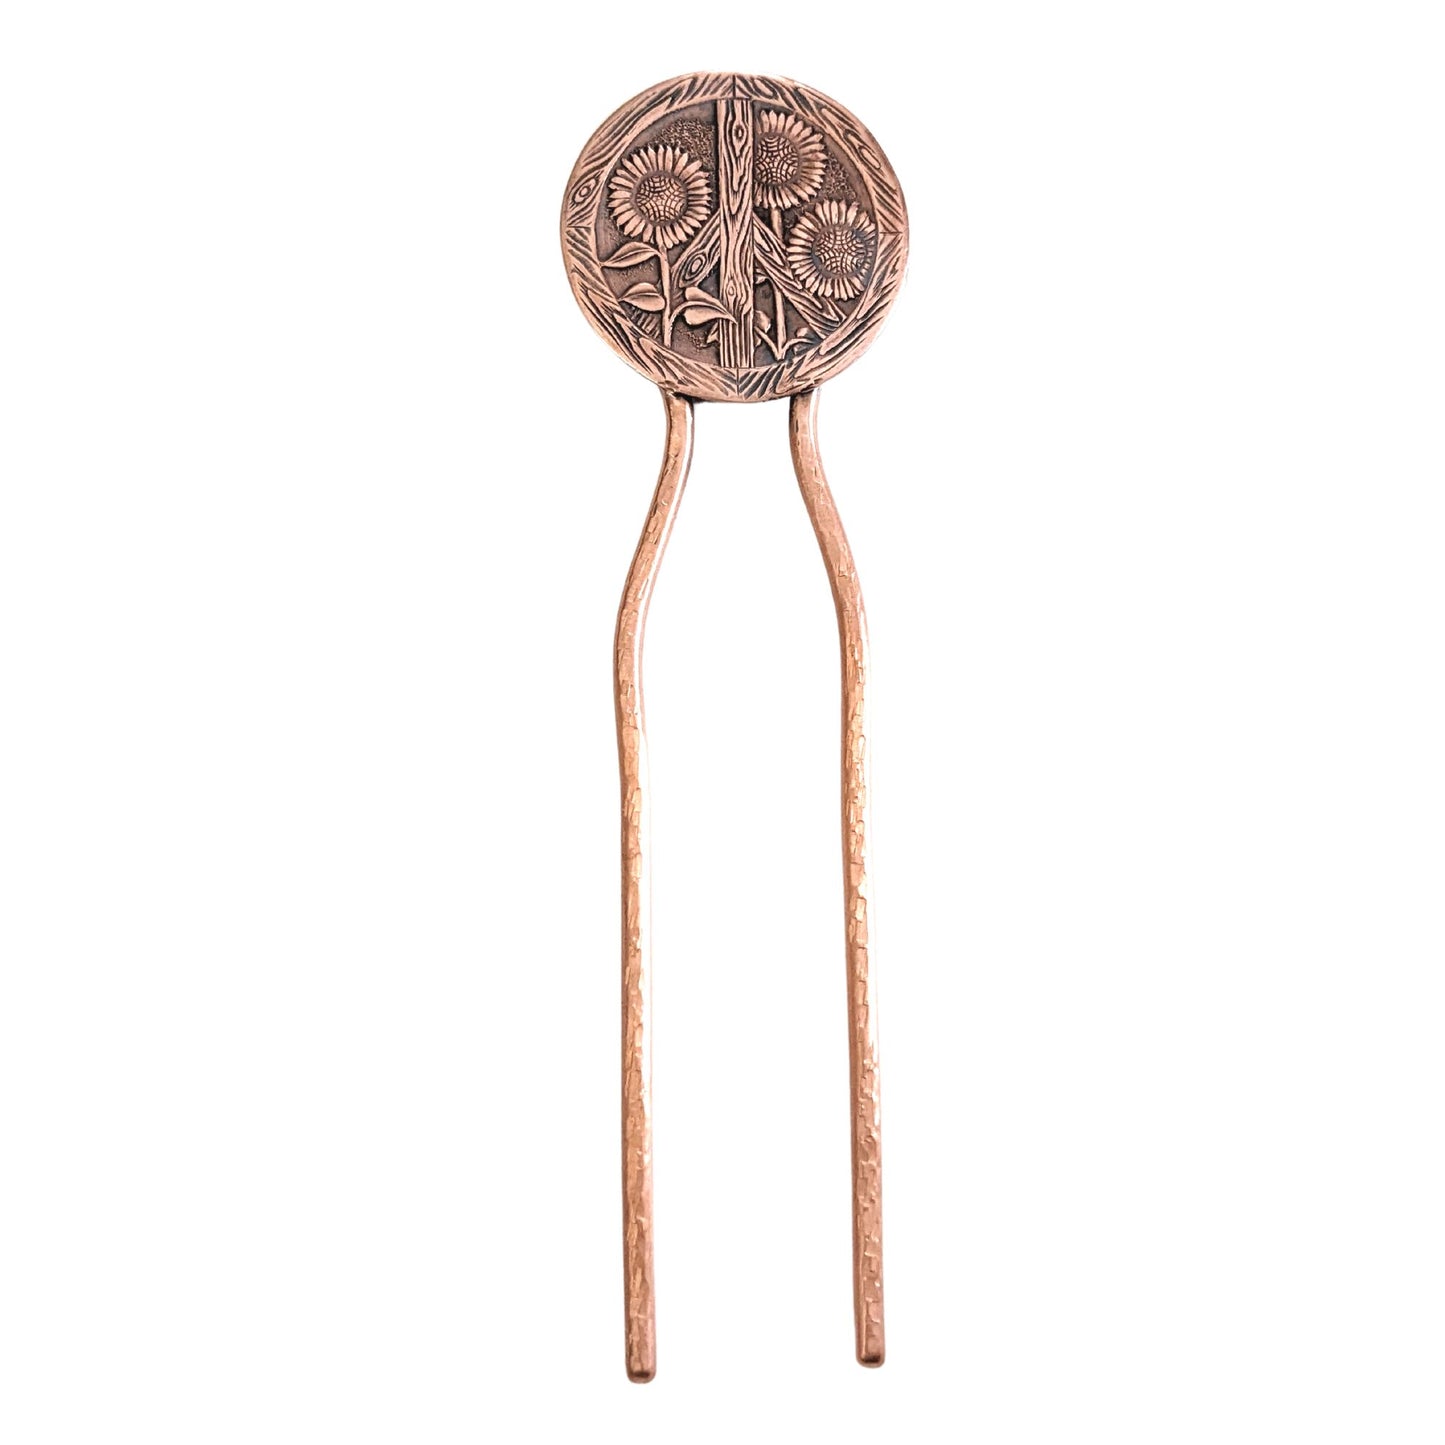 Copper hair fork with a large round design at top of sunflowers and a peace sign. The peace sign has a wood texture. Three sunflowers grow through the wood sign. There's a lot of detail - veins on the leaves, you can see the sunflower seeds and petals. On a copper fork with a hammered finish. This picture also shows the full length of the fork.